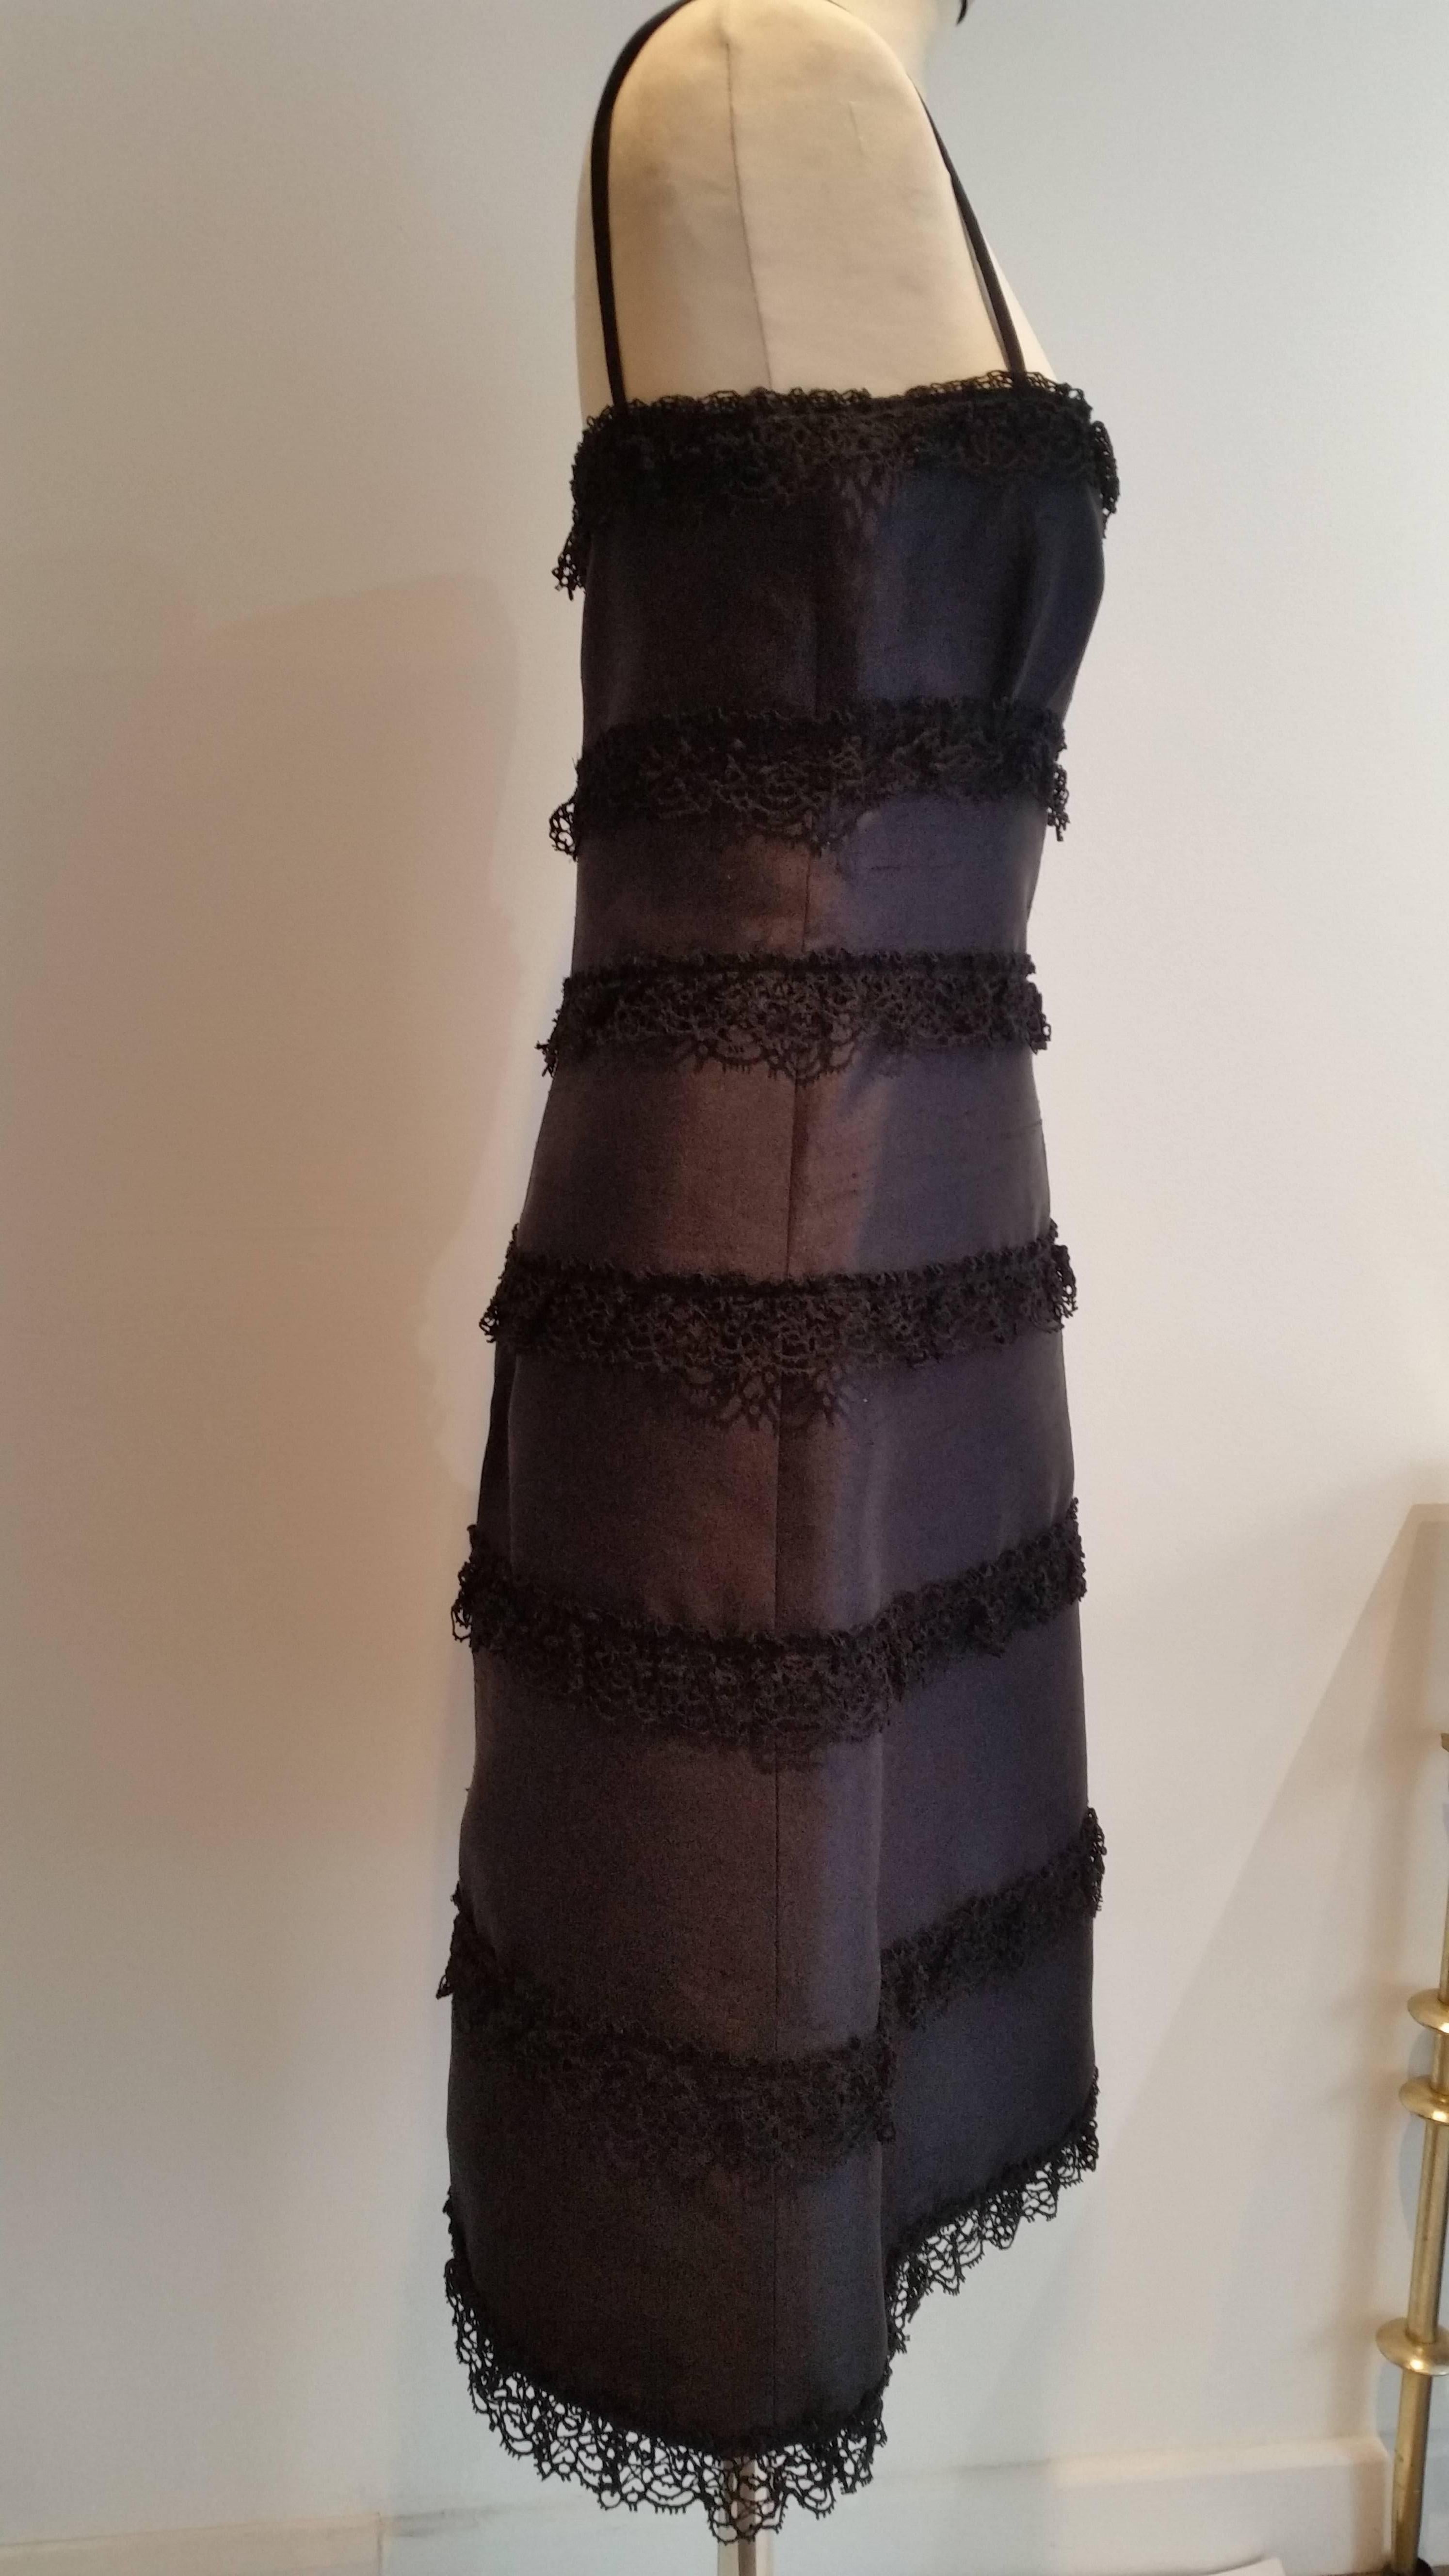 Valentino iconic little black dress. 
Shoe string straps.
Back hidden zip
Fully lined with black silk.
Panels of silk with lace edging
Very Audrey Hepburn....

Made in Italy



Measurements
Bust 32 inches
Length 30 inches (underarm to hem)


